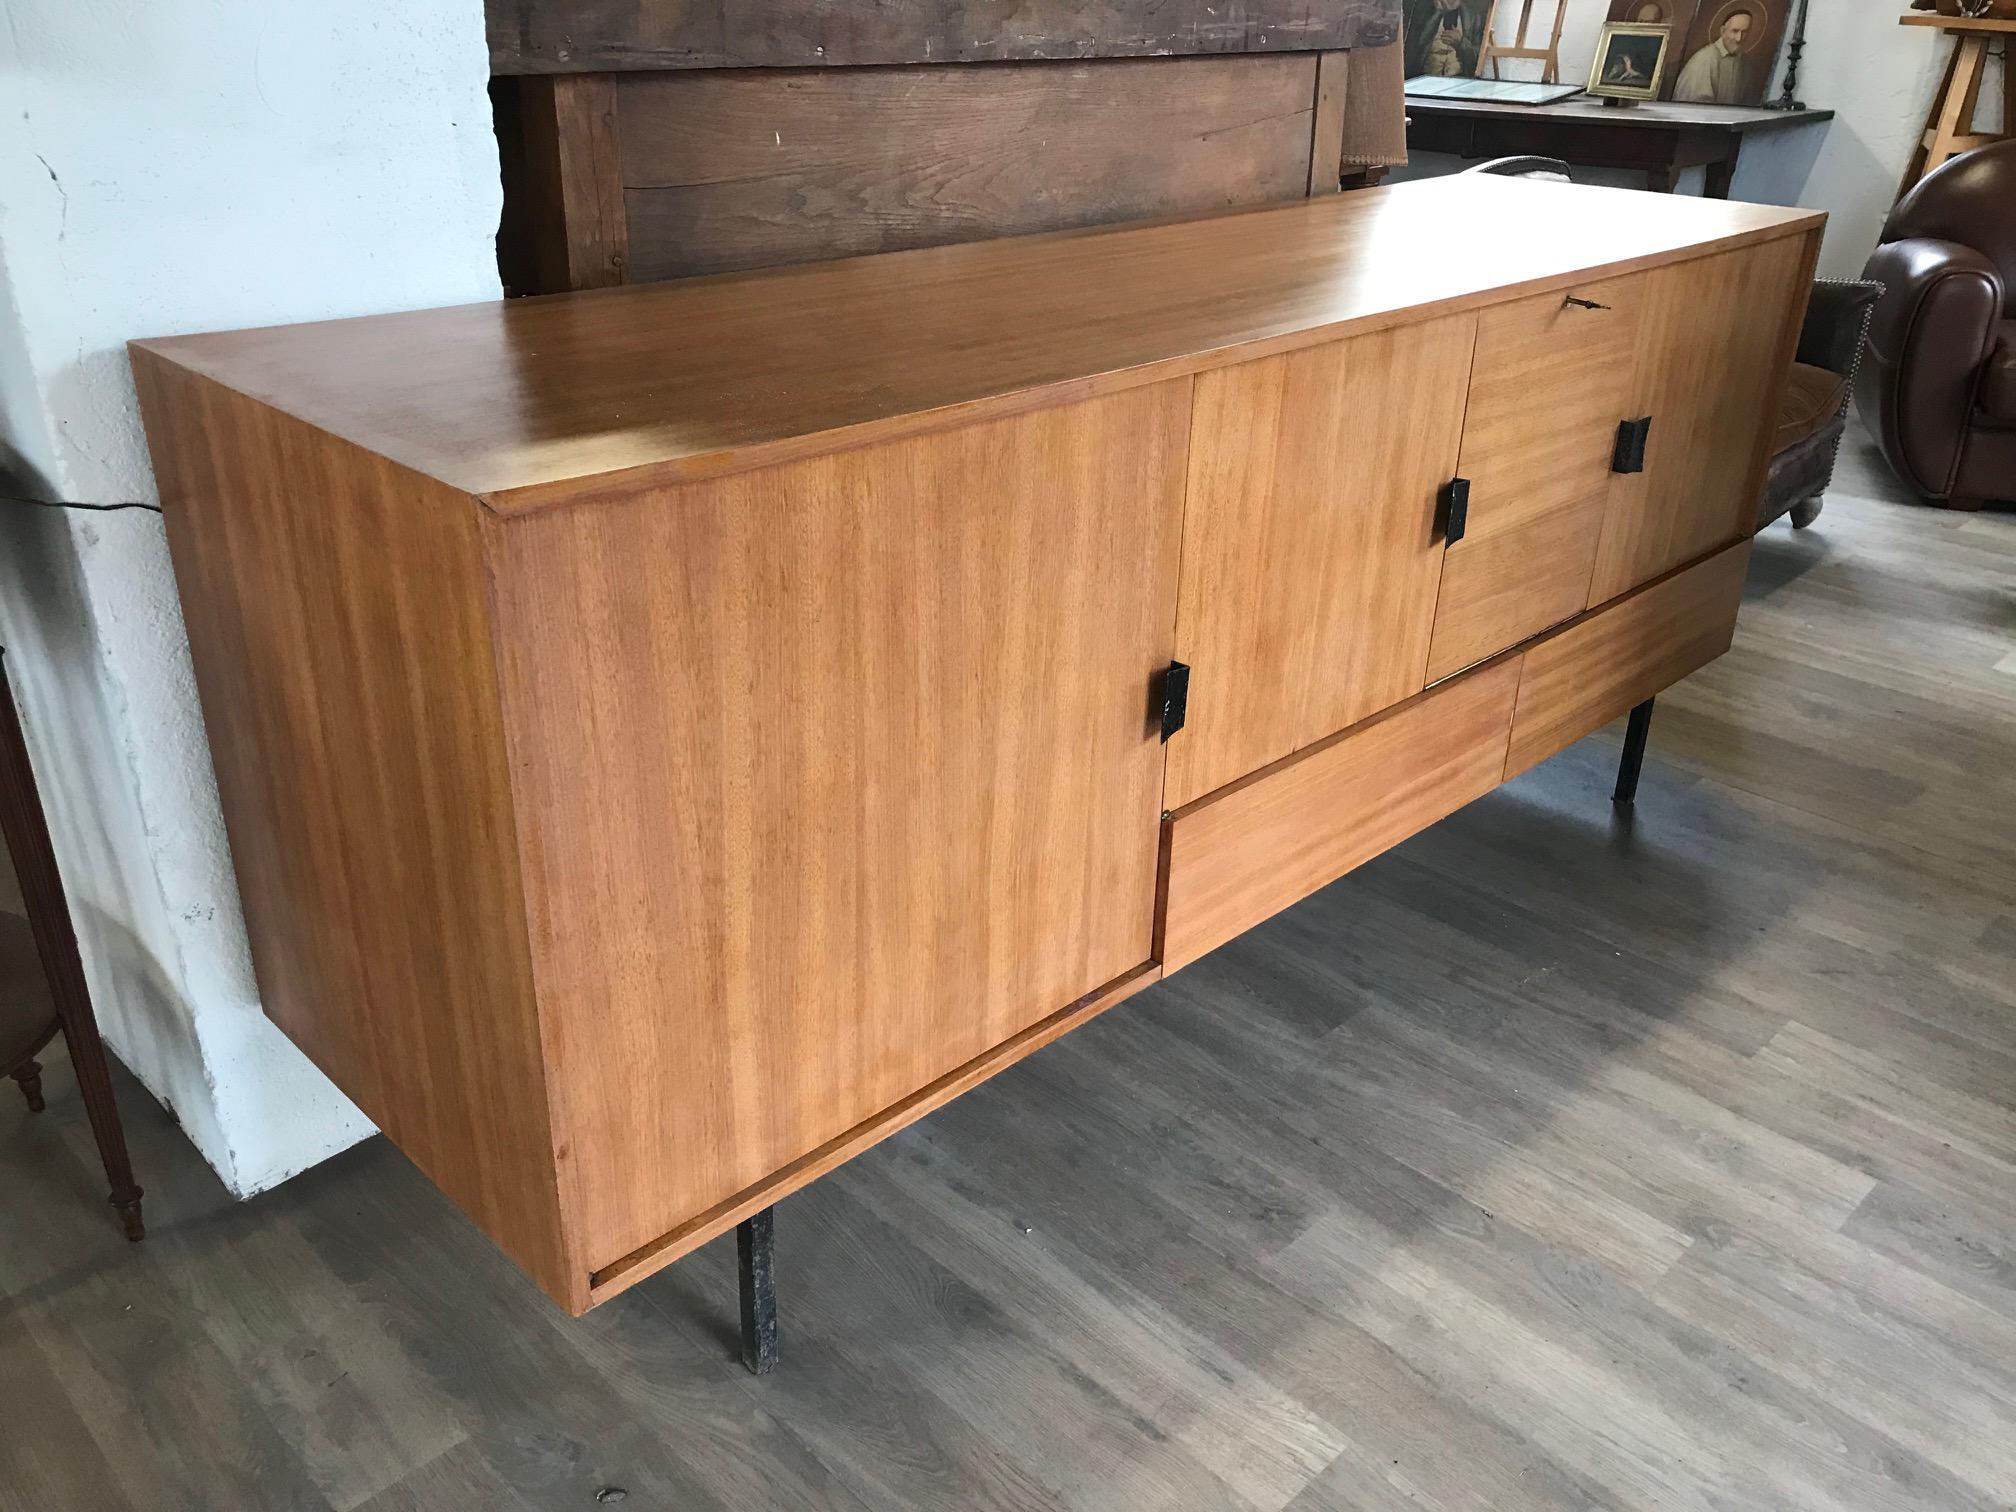 Very nice 20th century French Alain Richard oak veneer enfilade from the 1960s.
Three large doors with many shelves, two drawers and a secretary door.
Black metals handles and base.
Good quality and condition.